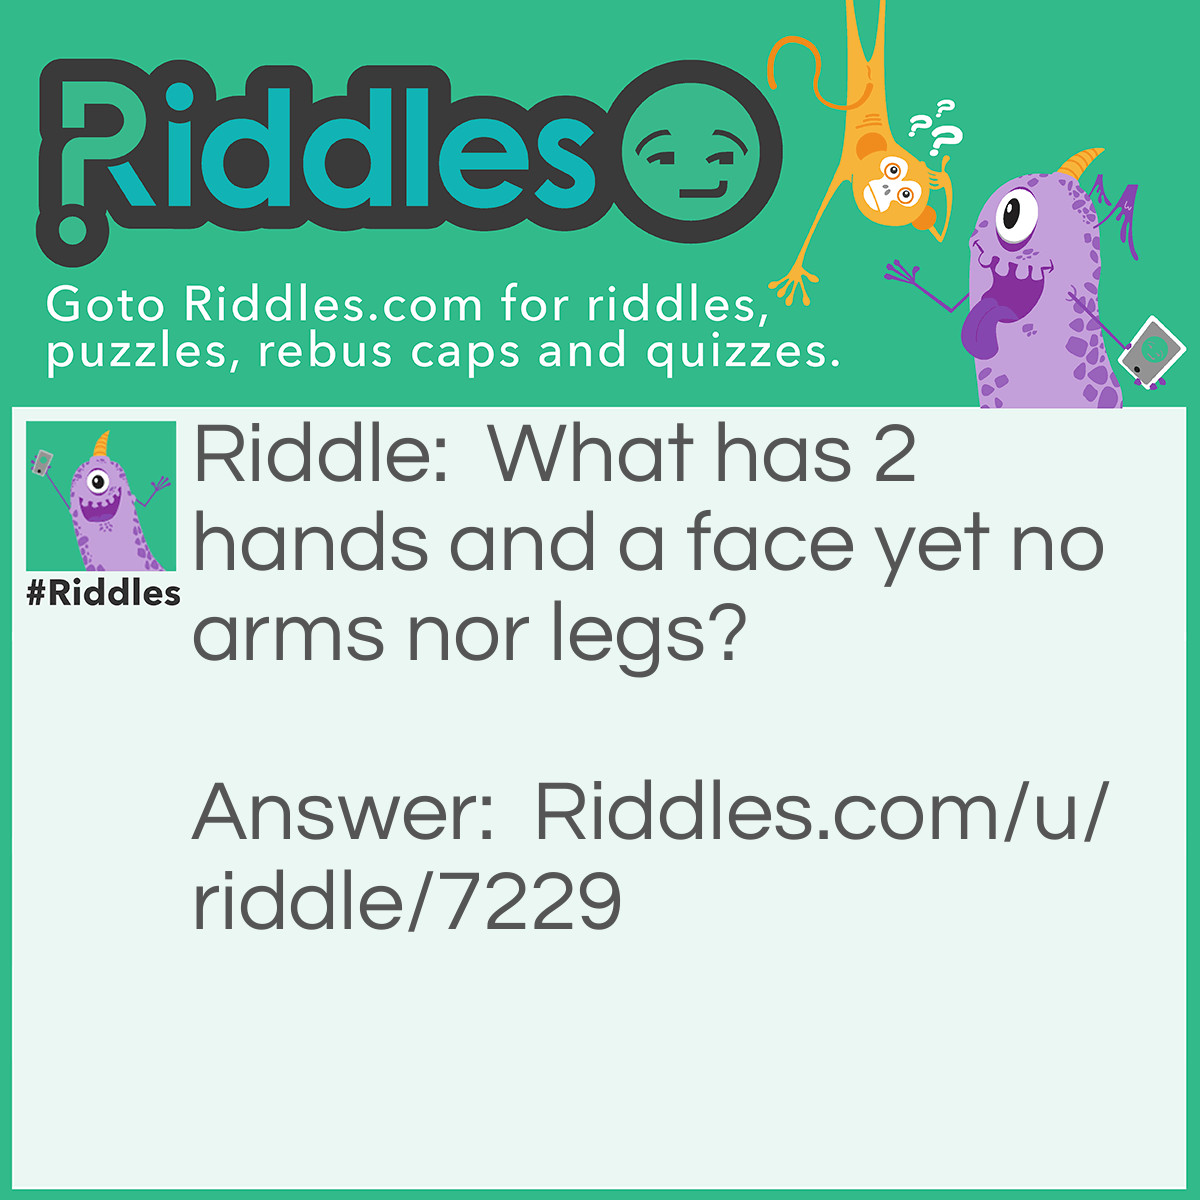 Riddle: What has 2 hands and a face yet no arms nor legs? Answer: A Clock.